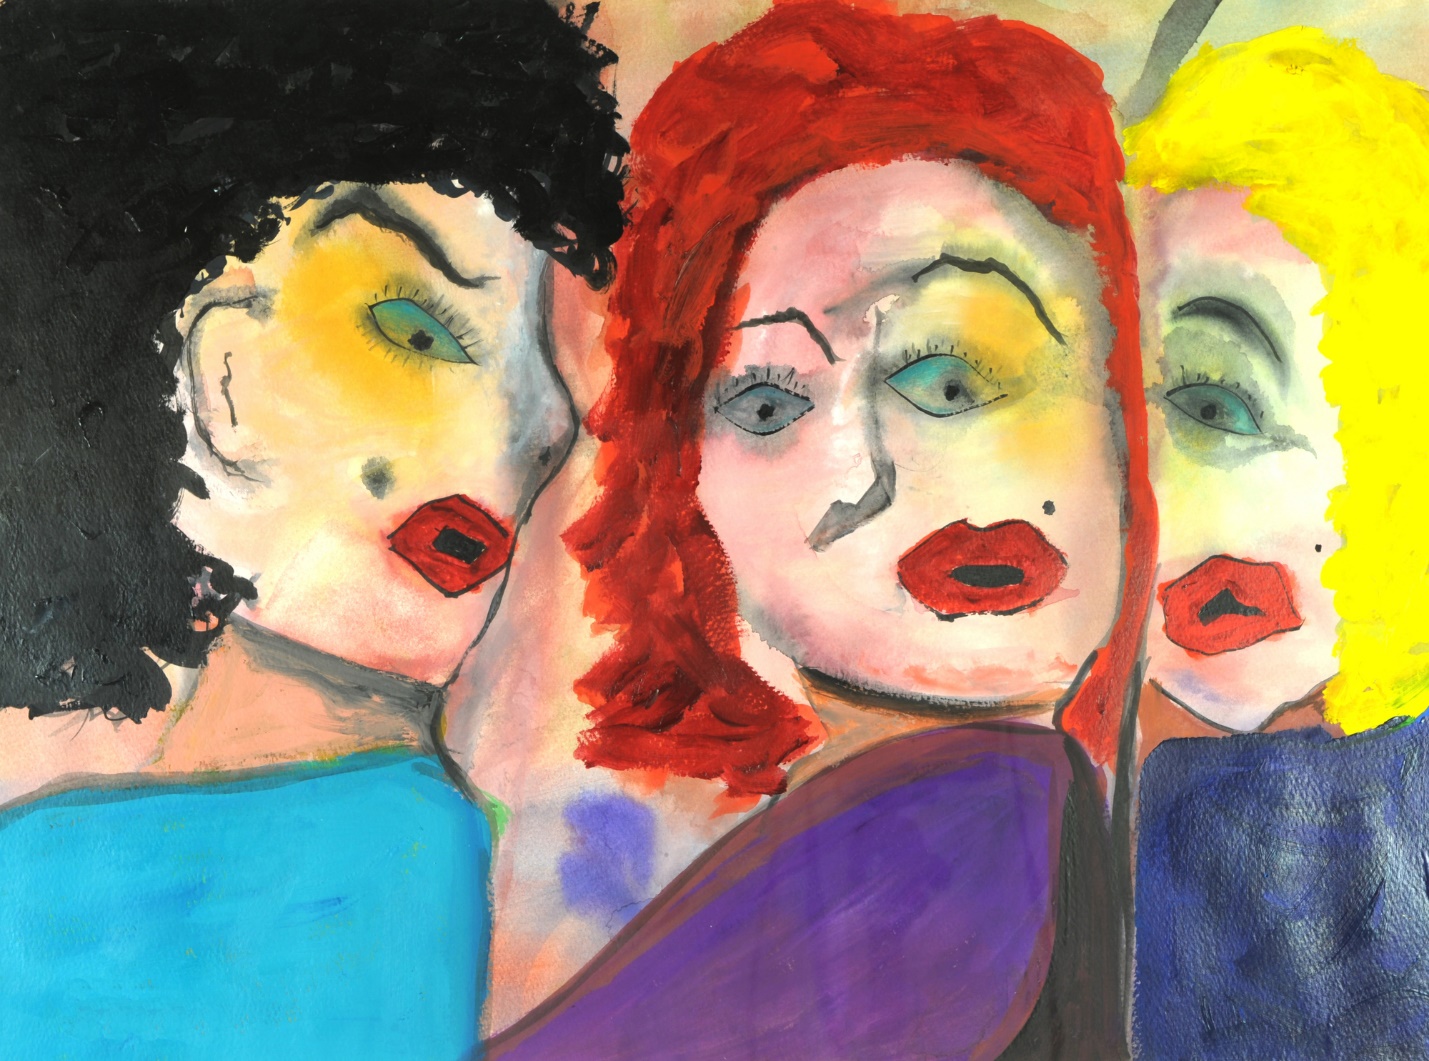 A group of women with different colored faces

Description automatically generated